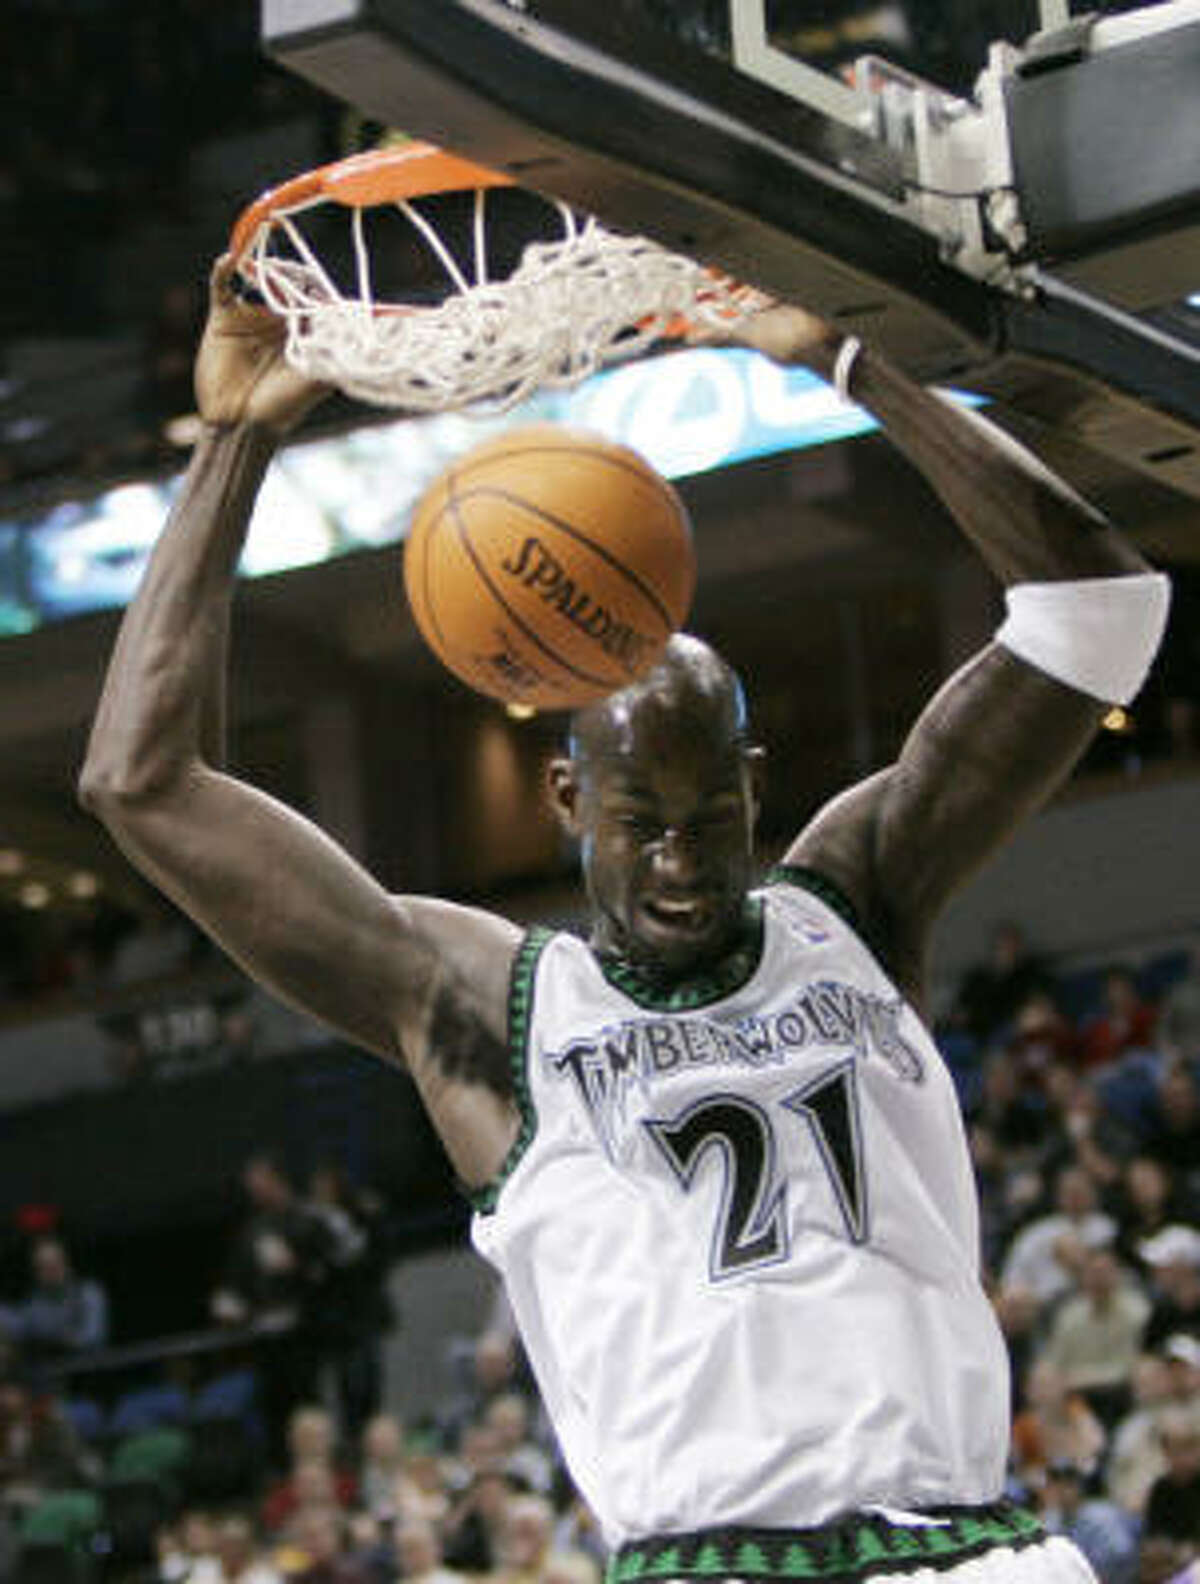 Kevin Garnett, showing his stuff in the first quarter en route to 44 points, helped Randy Wittman emerge victorious in his home debut as Timberwolves coach.